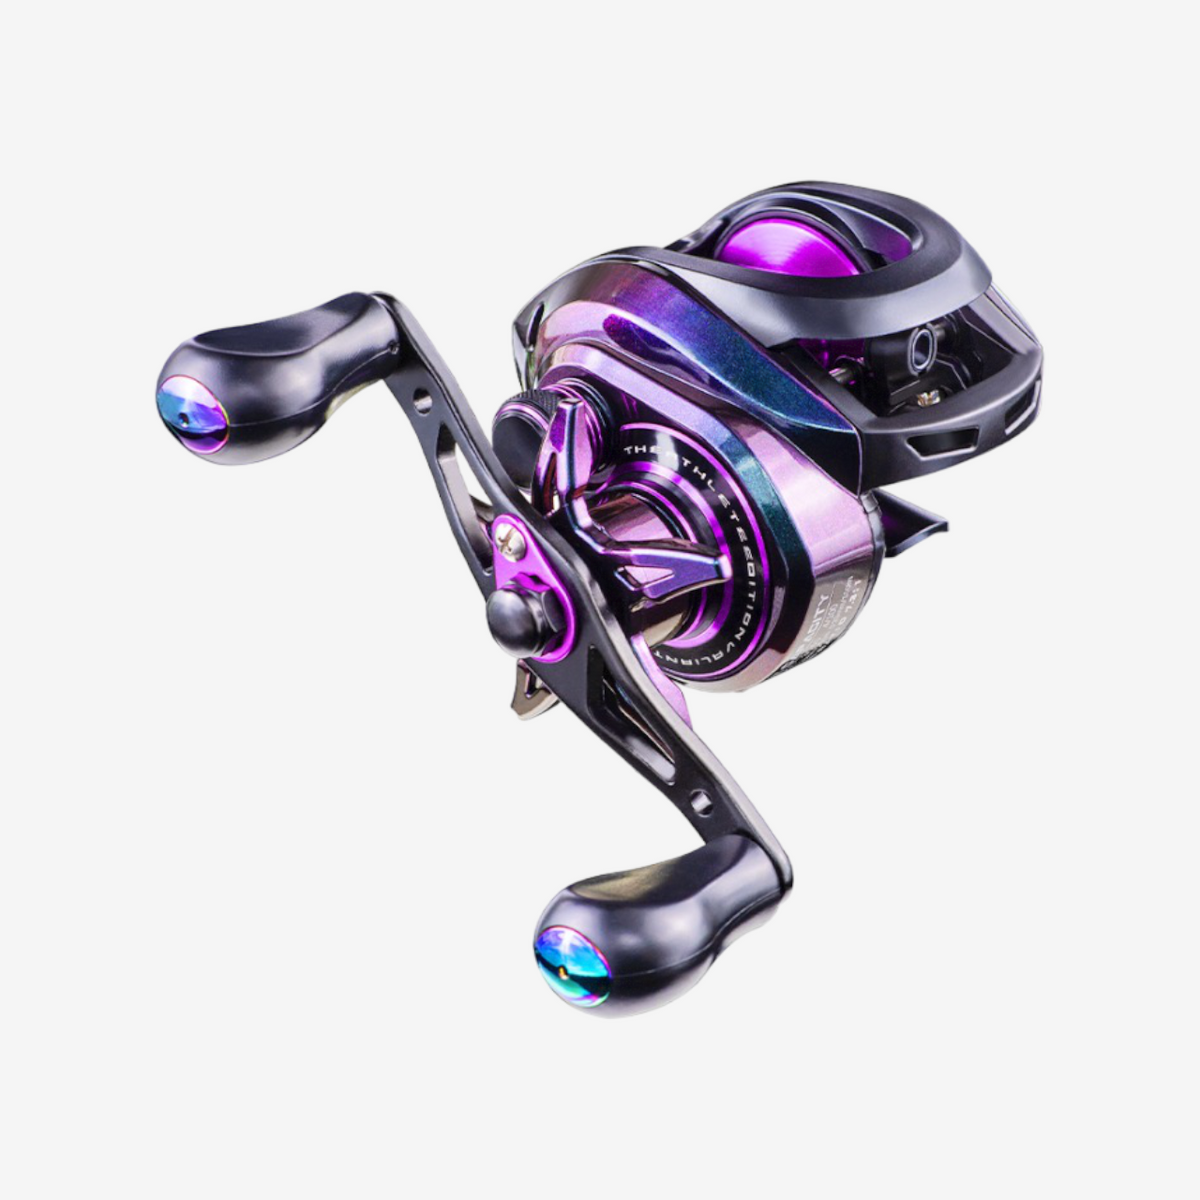 Obalus The Facebook 8.1 Baitcast Reel, Overview and On the Water